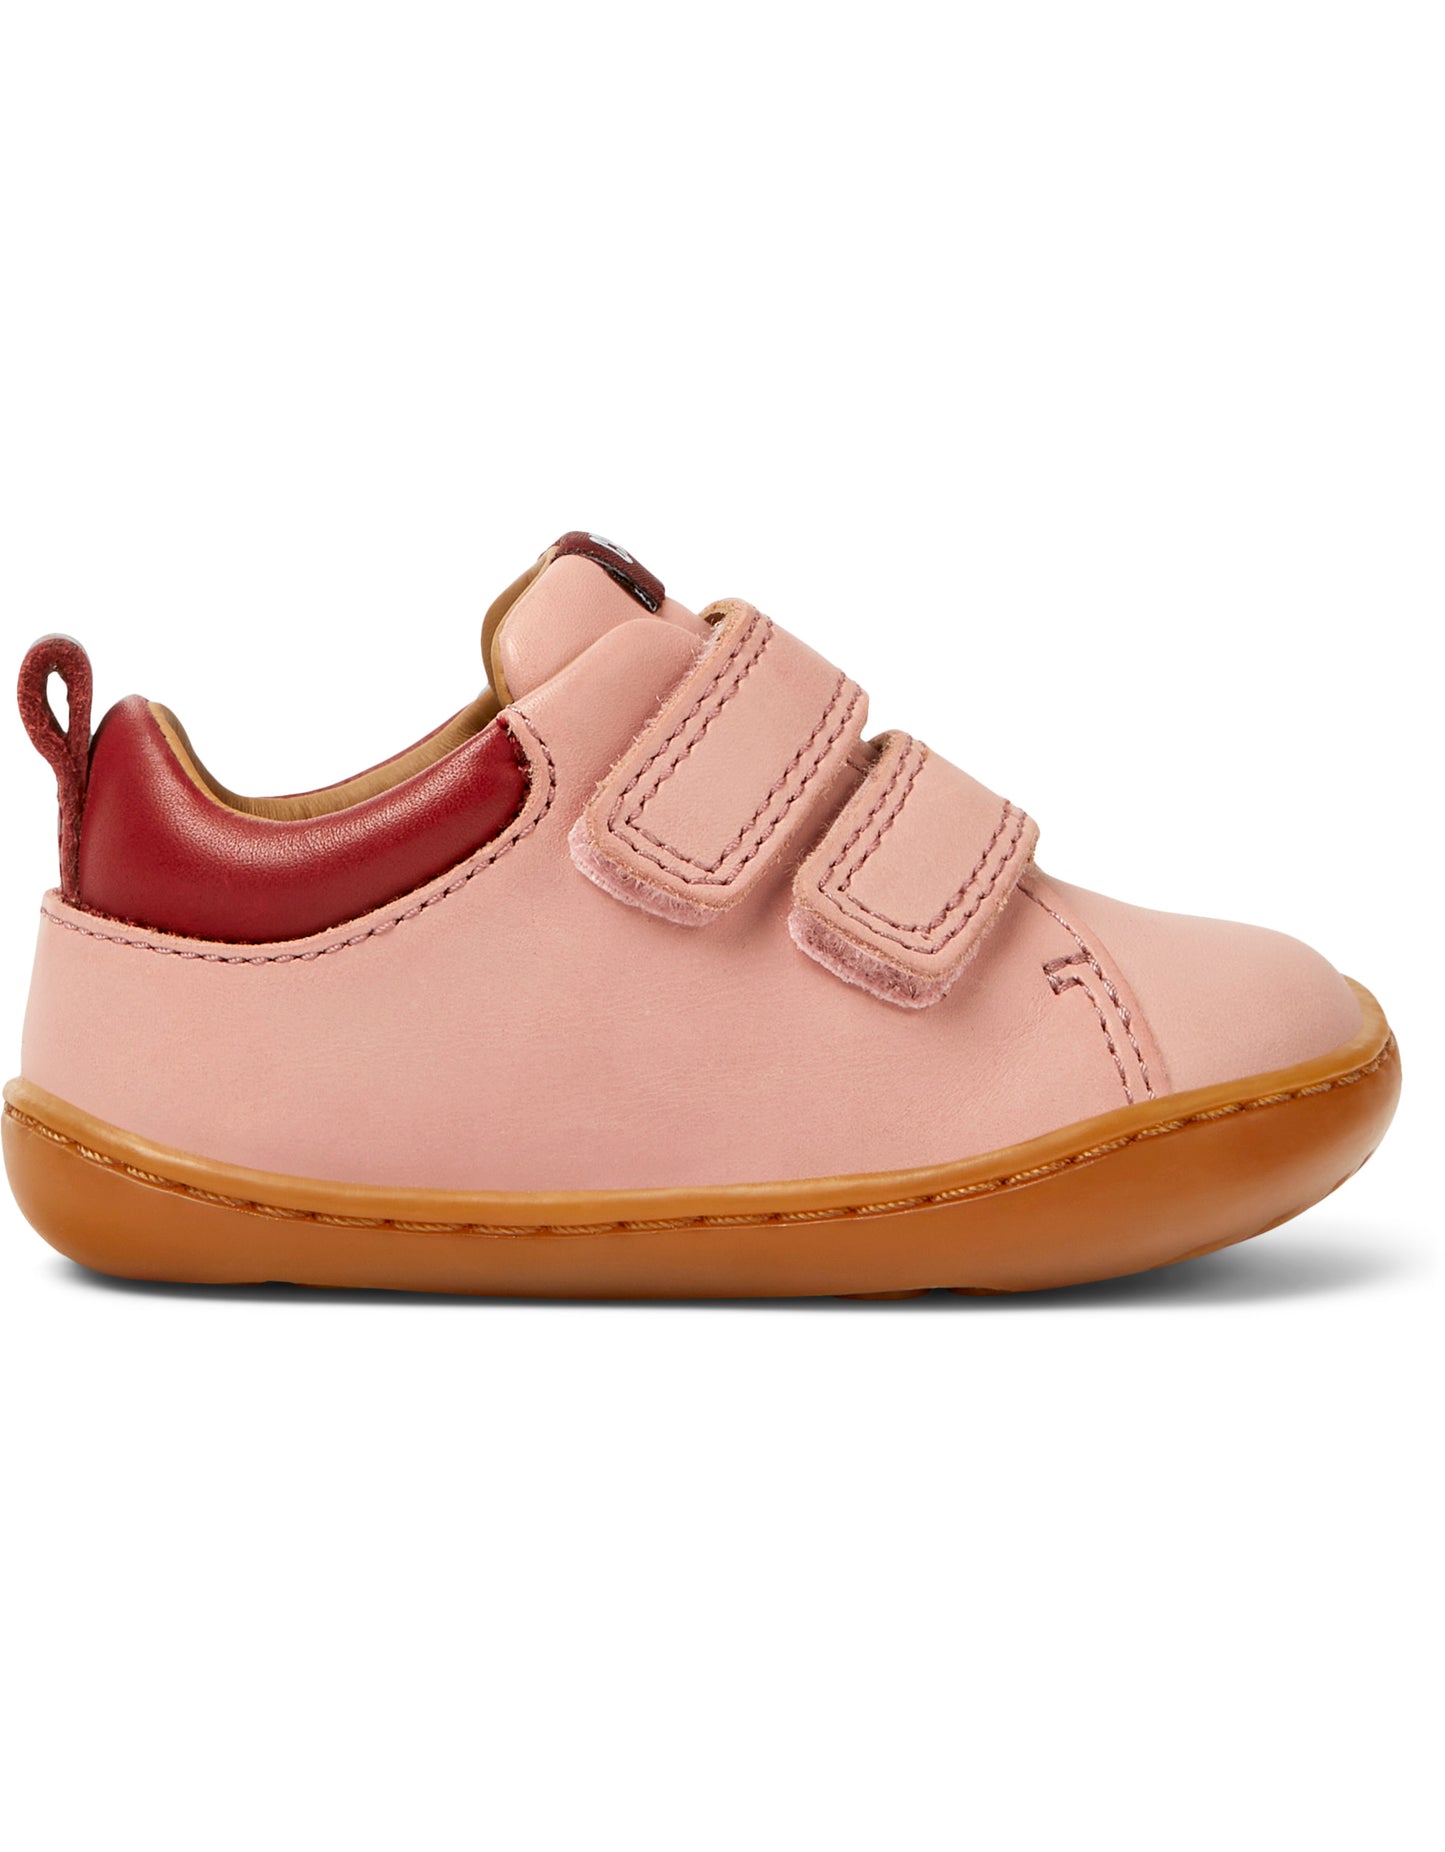 A girls casual shoe by Camper, style K800405-020, Peu Cami FW, in Pink Leather, with velcro fastening. Right Side view.